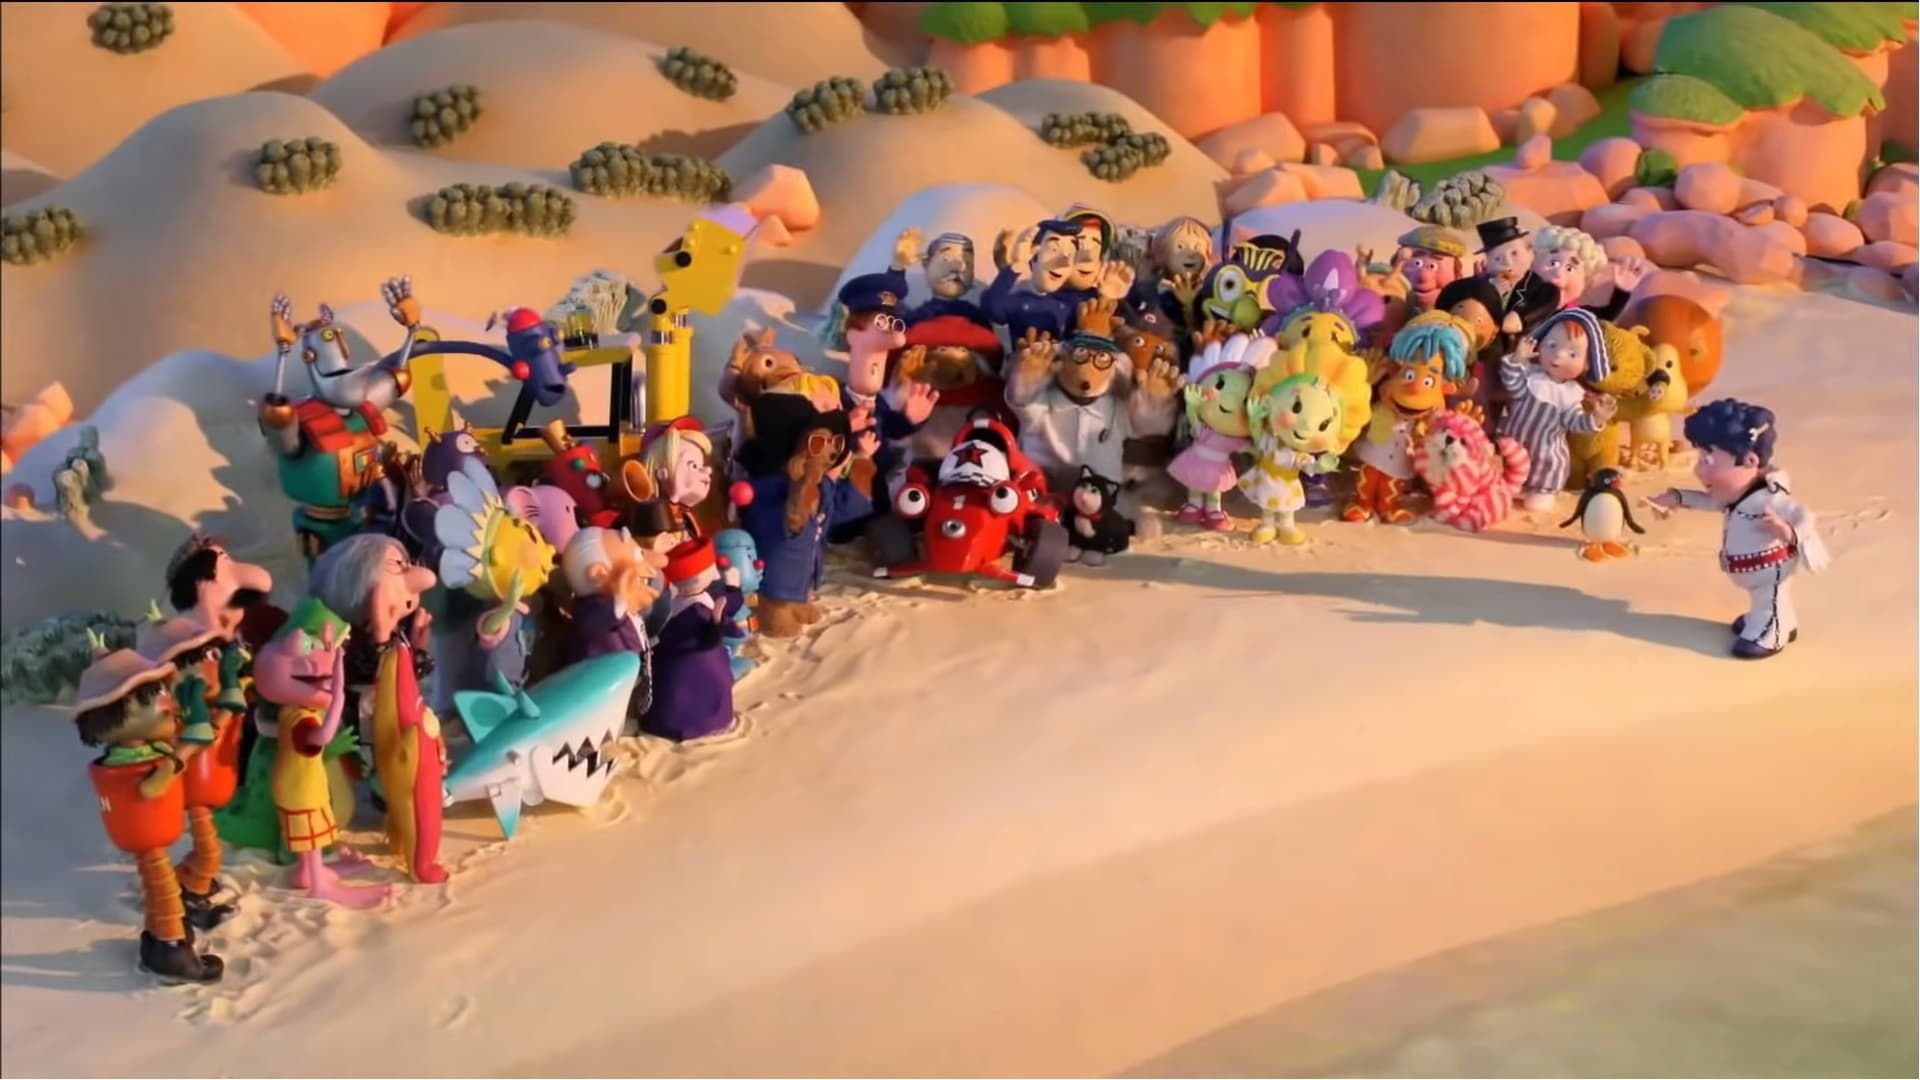 Peter Kay's Animated All Star Band: The Official BBC Children in Need Medley background